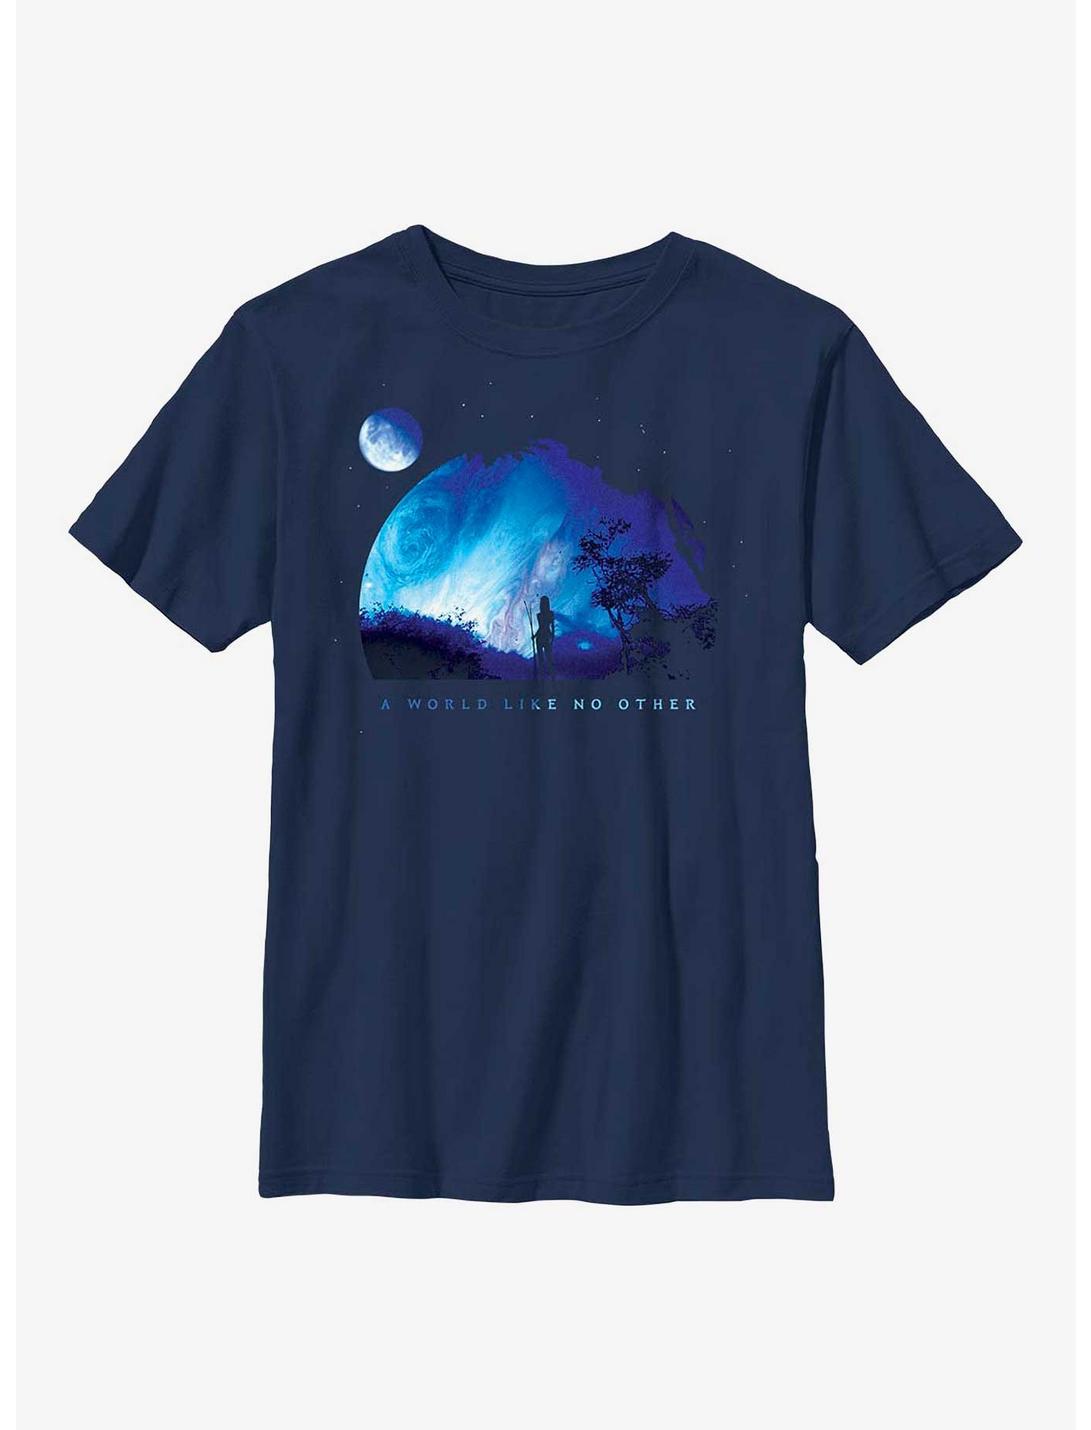 Avatar A World Like No Other Youth T-Shirt, NAVY, hi-res